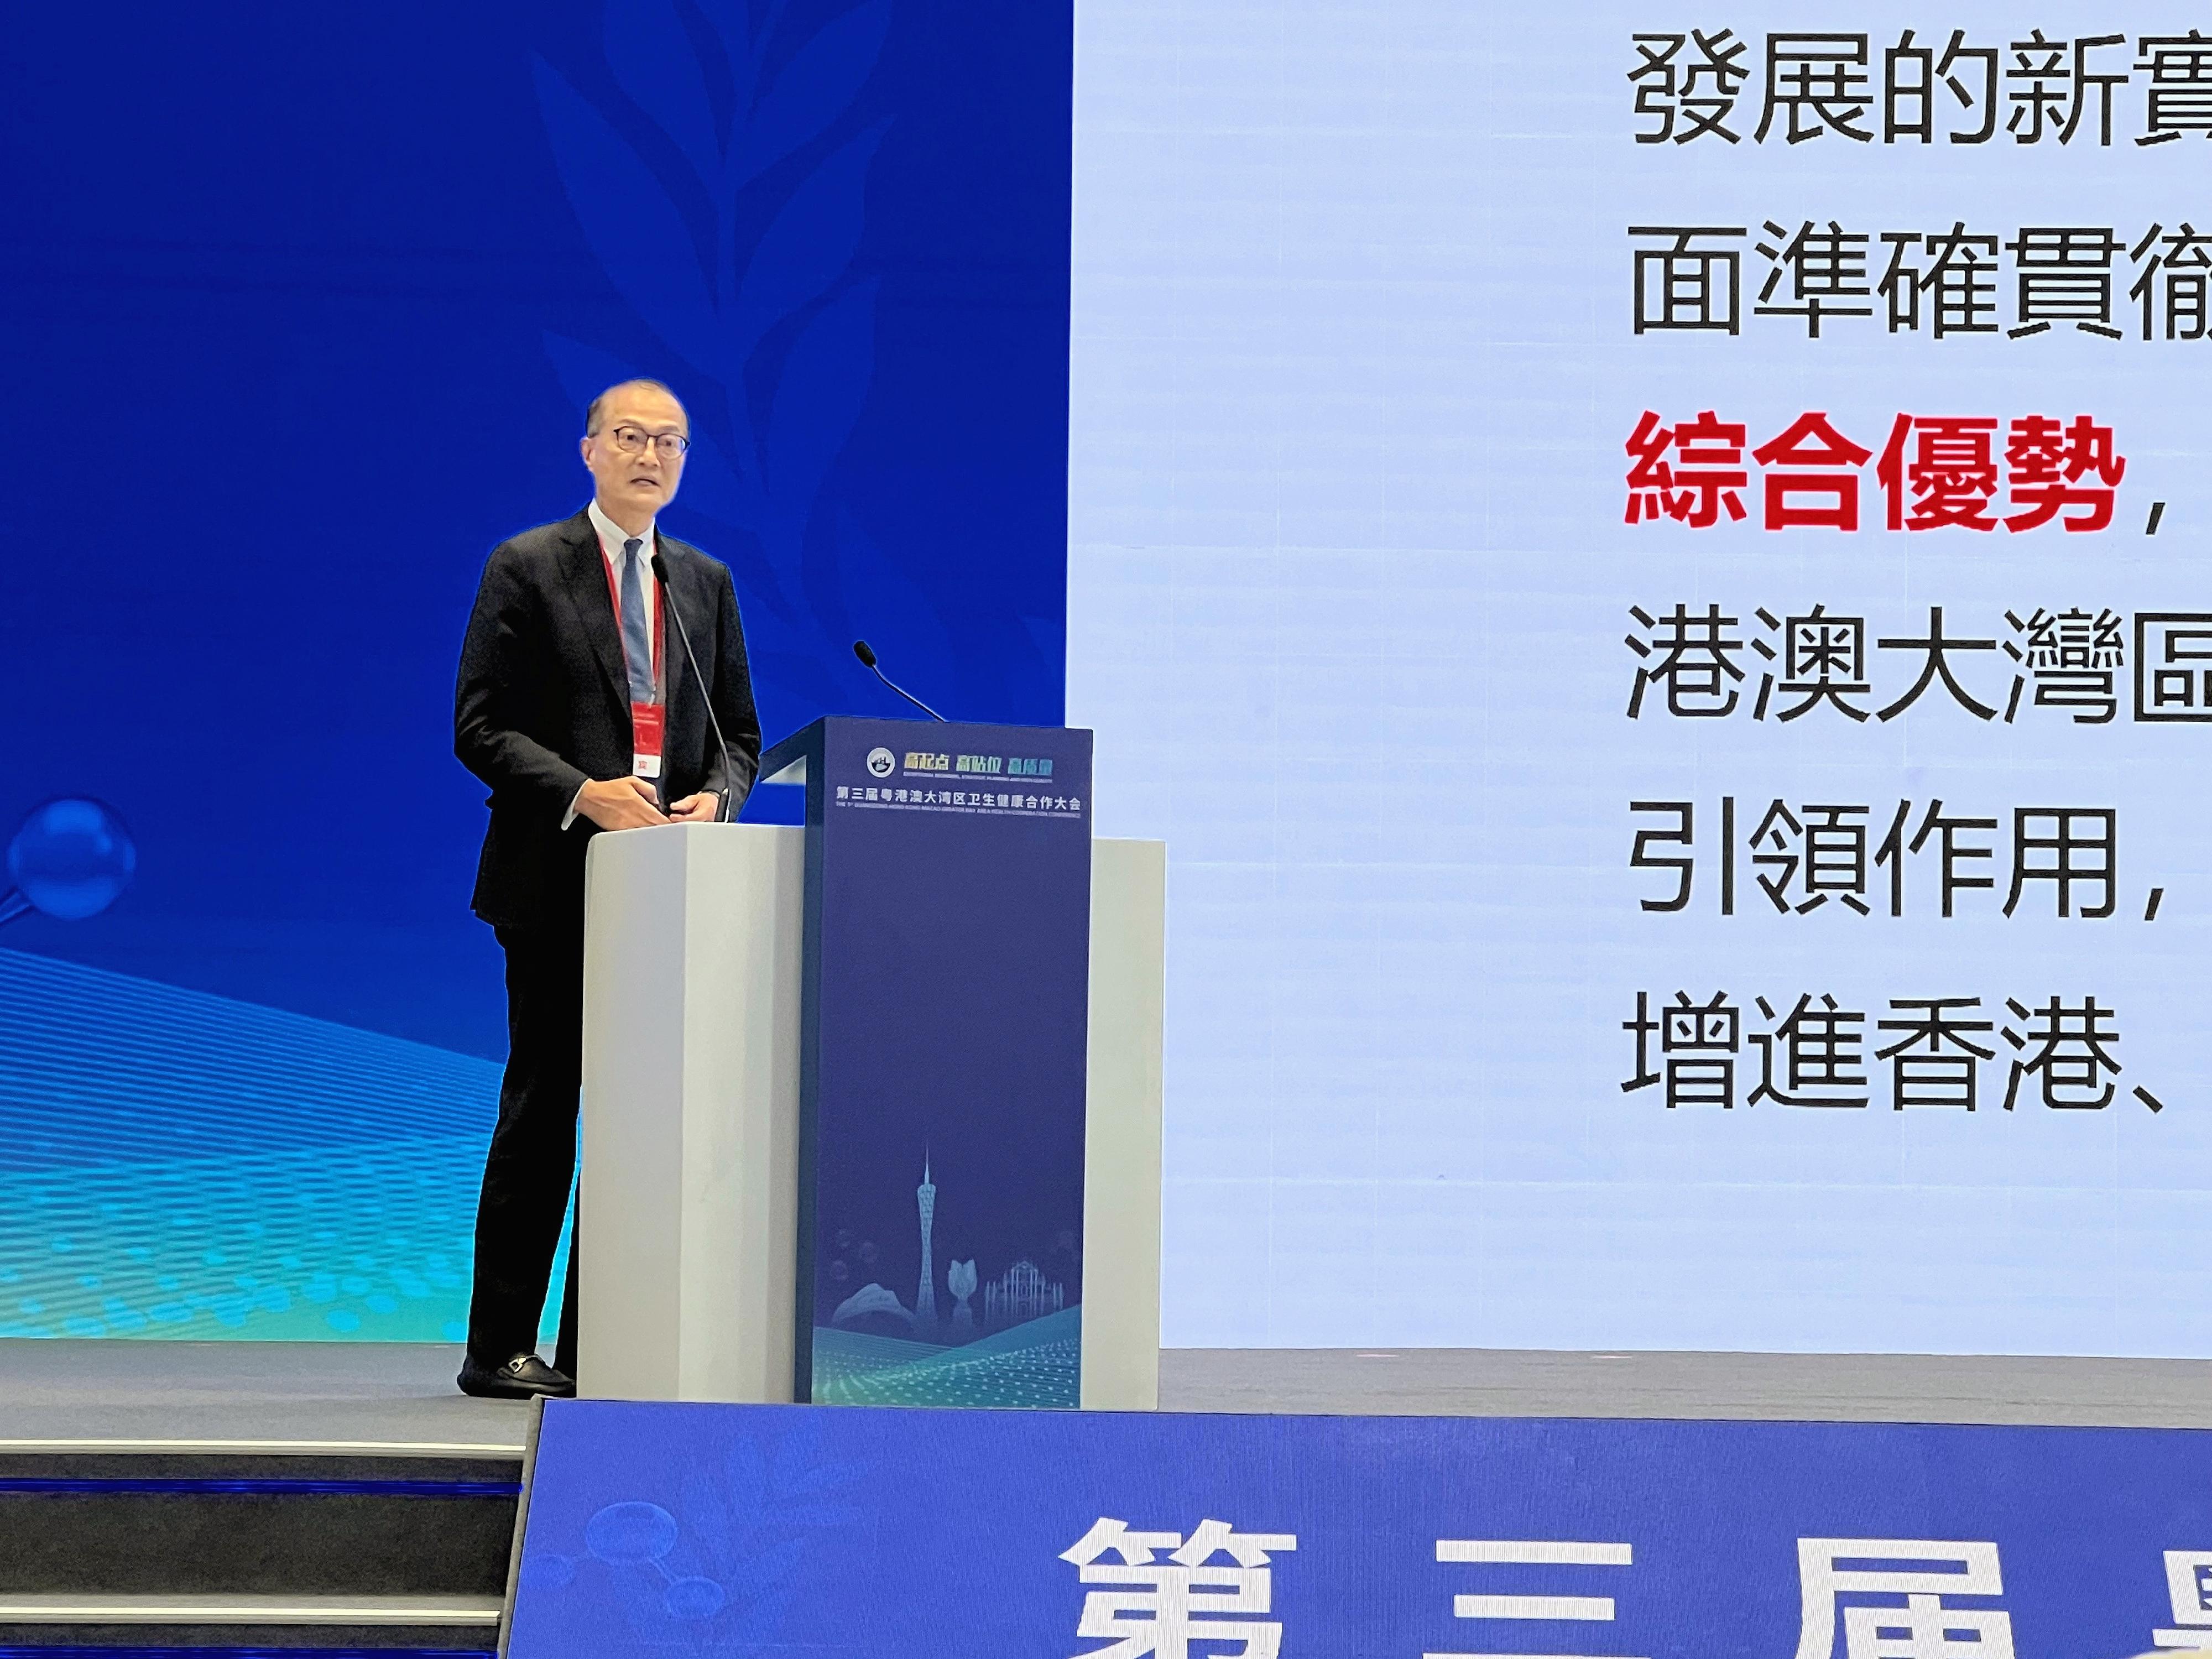 The Secretary for Health, Professor Lo Chung-mau, led a Hong Kong Special Administrative Region delegation to attend the 3rd Guangdong-Hong Kong-Macao Greater Bay Area Health Cooperation Conference in Nansha, Guangzhou, today (November 10). Photo shows Professor Lo delivering a keynote speech at the Conference.